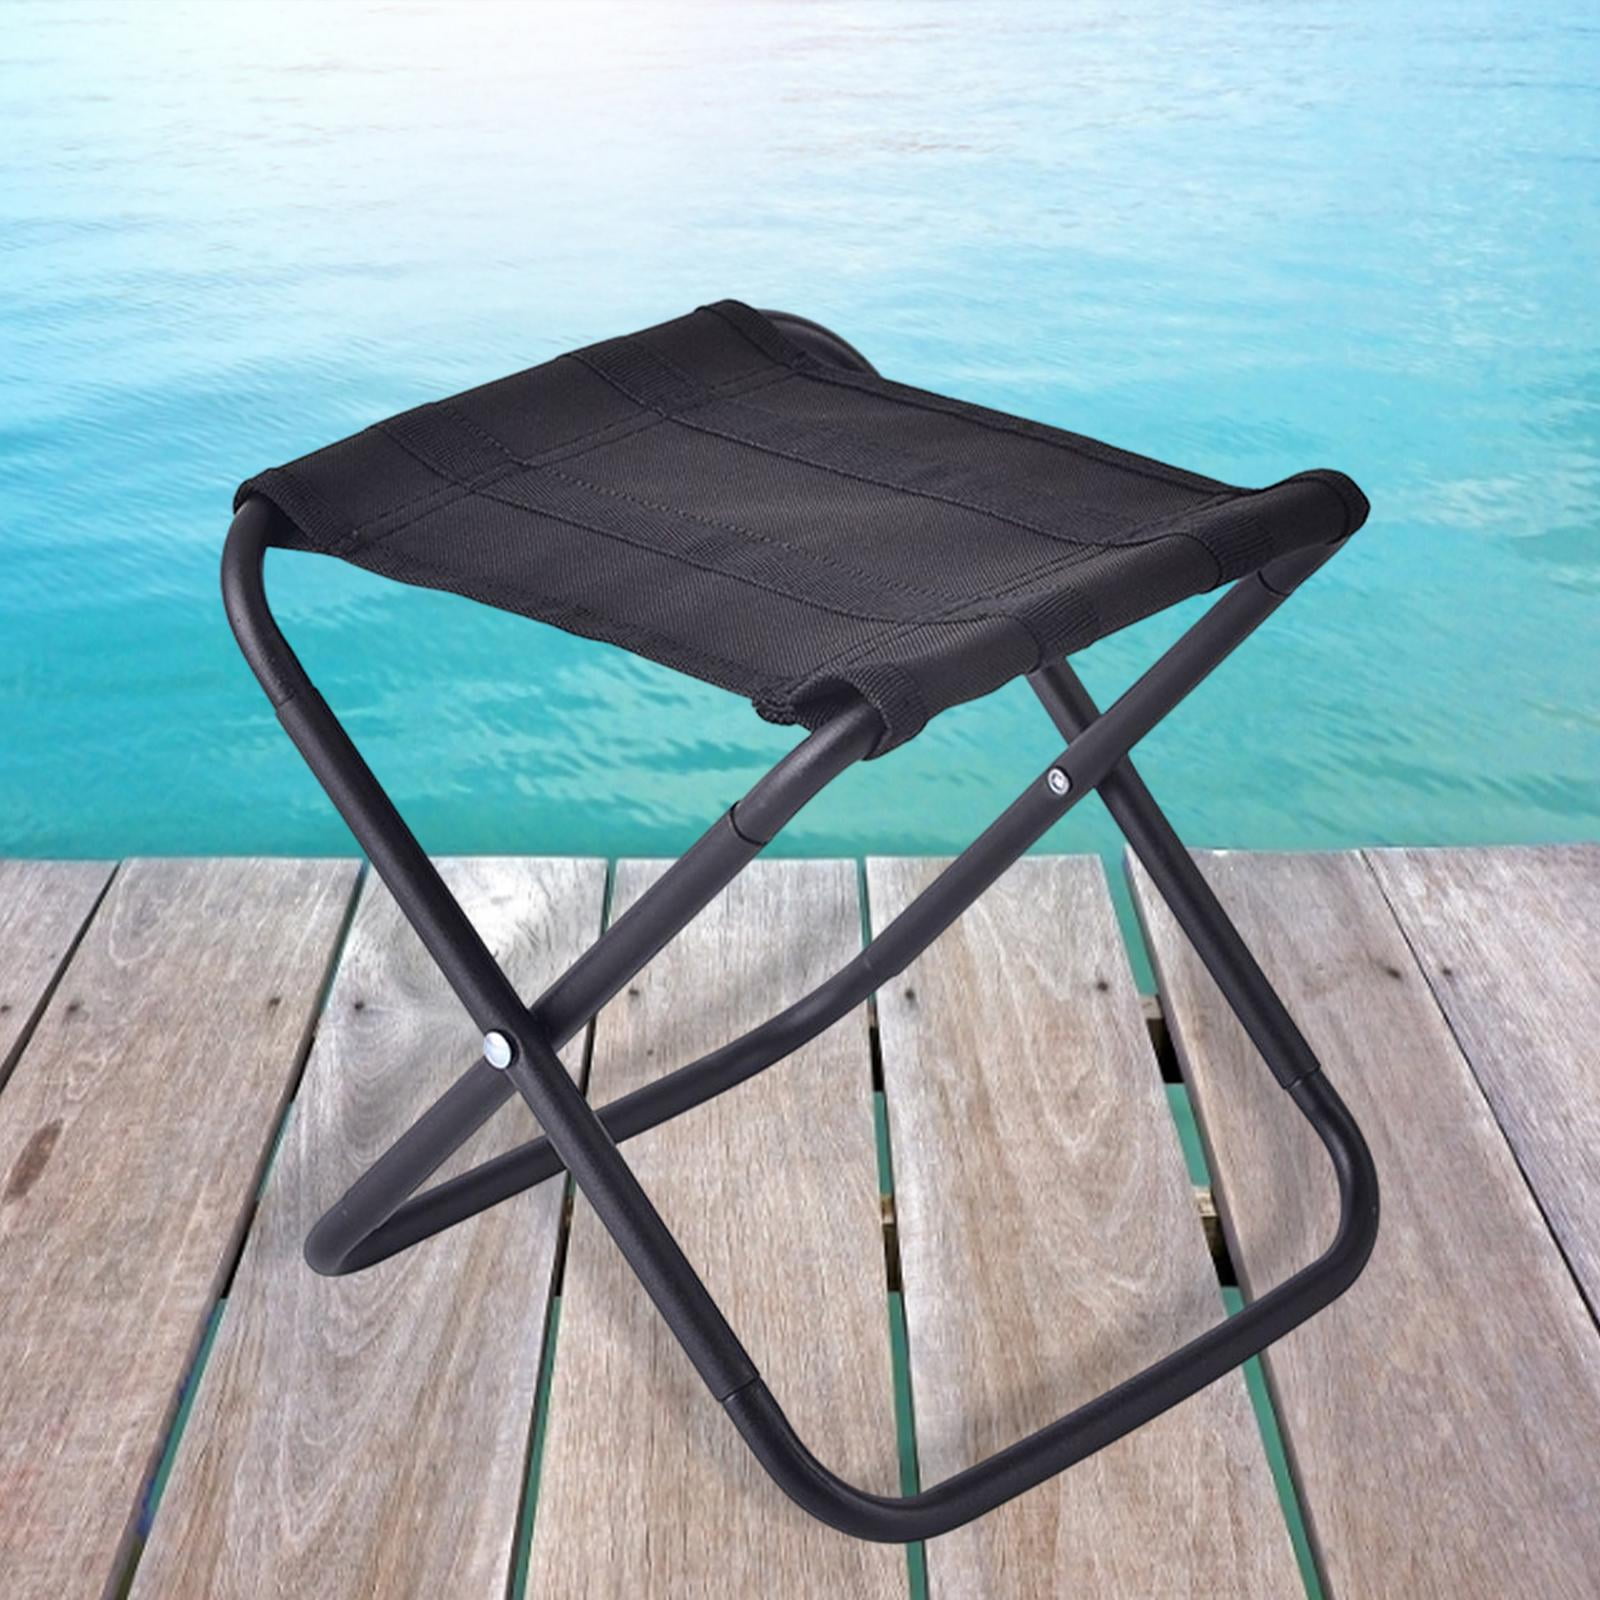 Portable Folding Camping Stool, Lightweight Camp Chair for Fishing